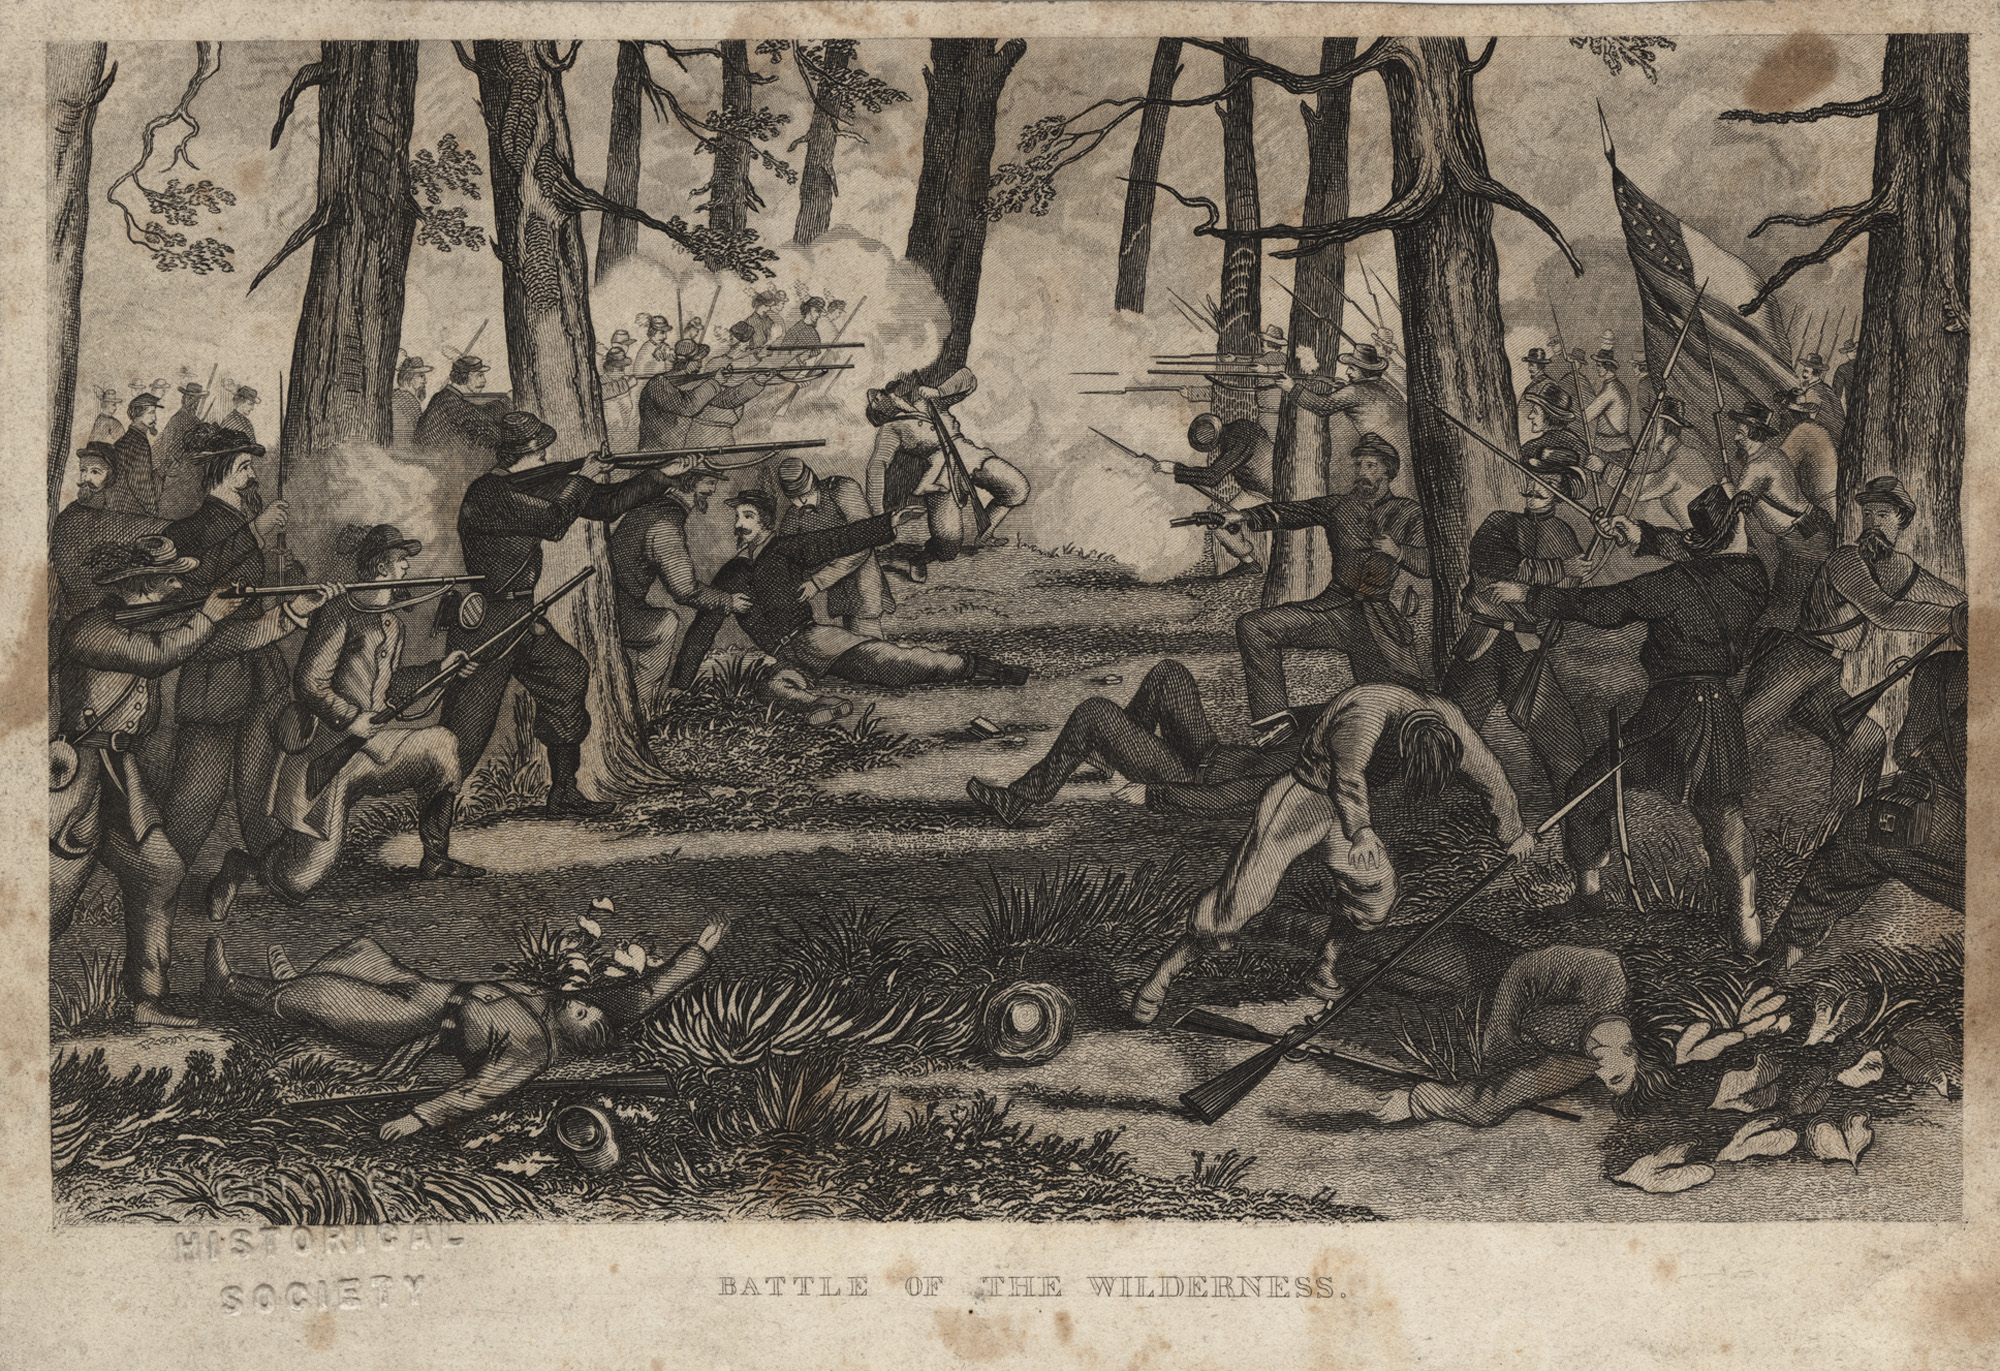 Battle of the Wilderness, c. 1864, lithograph, 5 x 7 inches (Chicago History Museum)